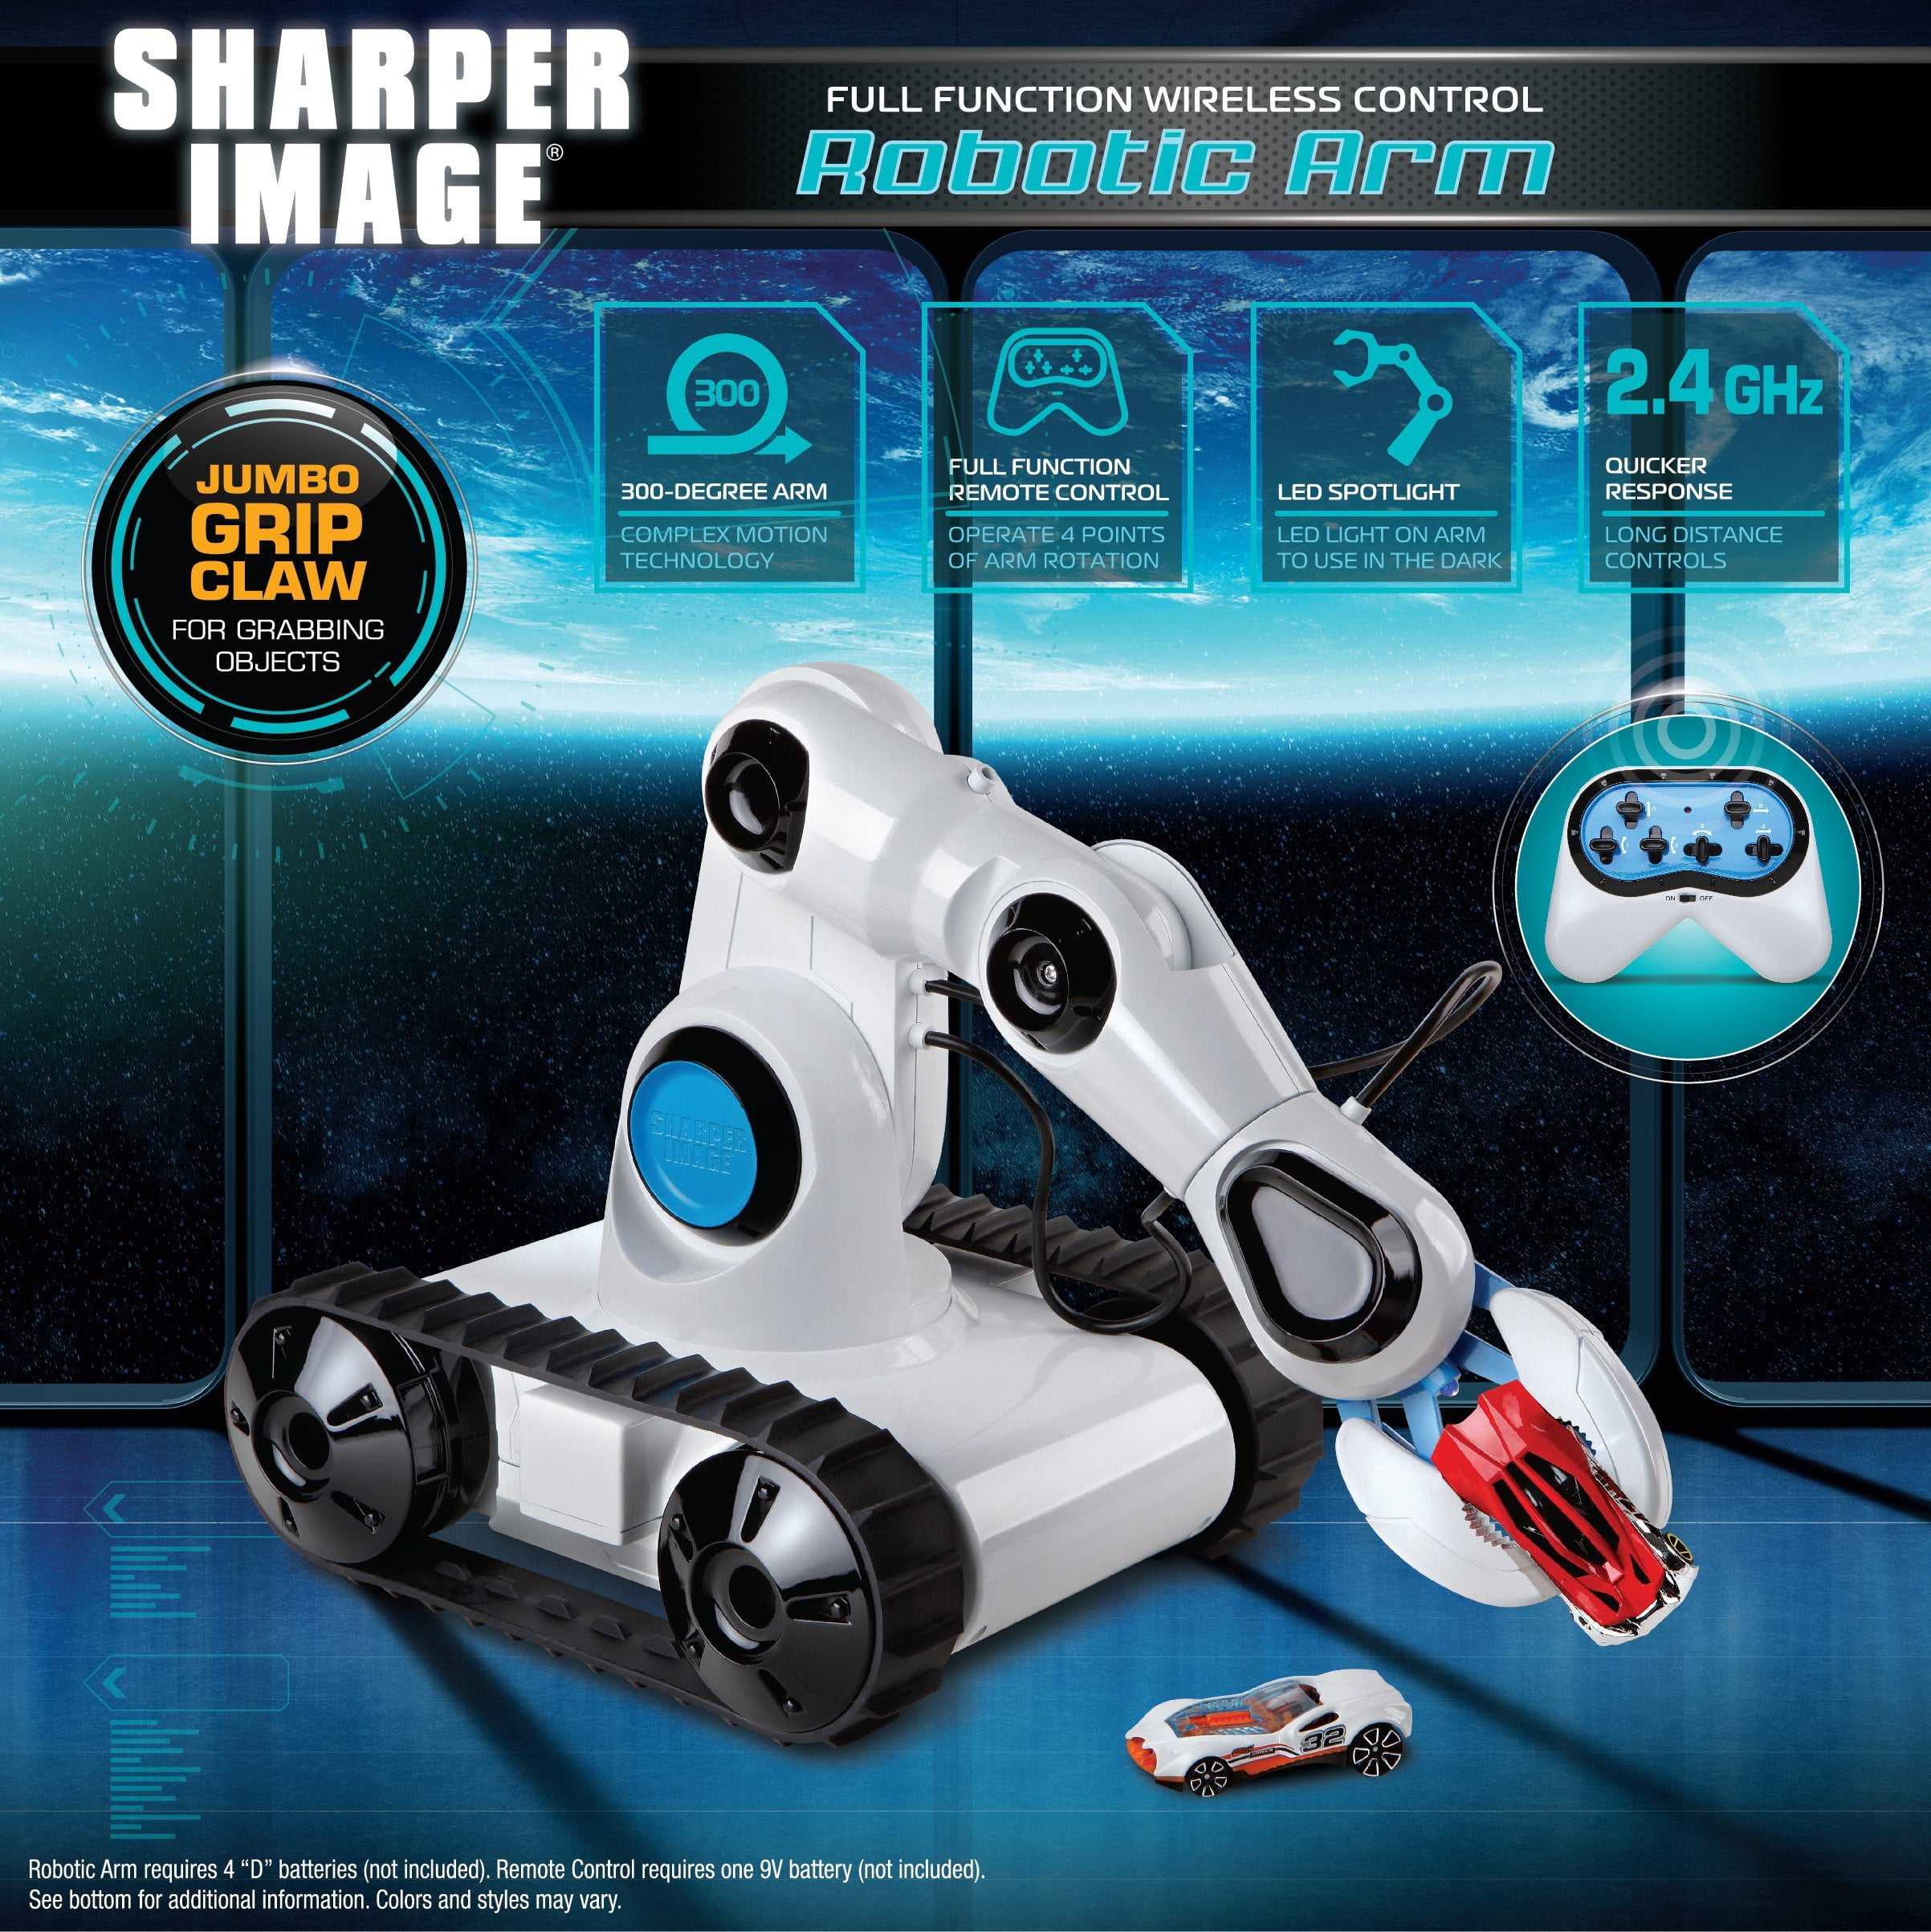 SHARPER IMAGE Full Function Wireless Control Robotic Arm Toy with Spotlight, 